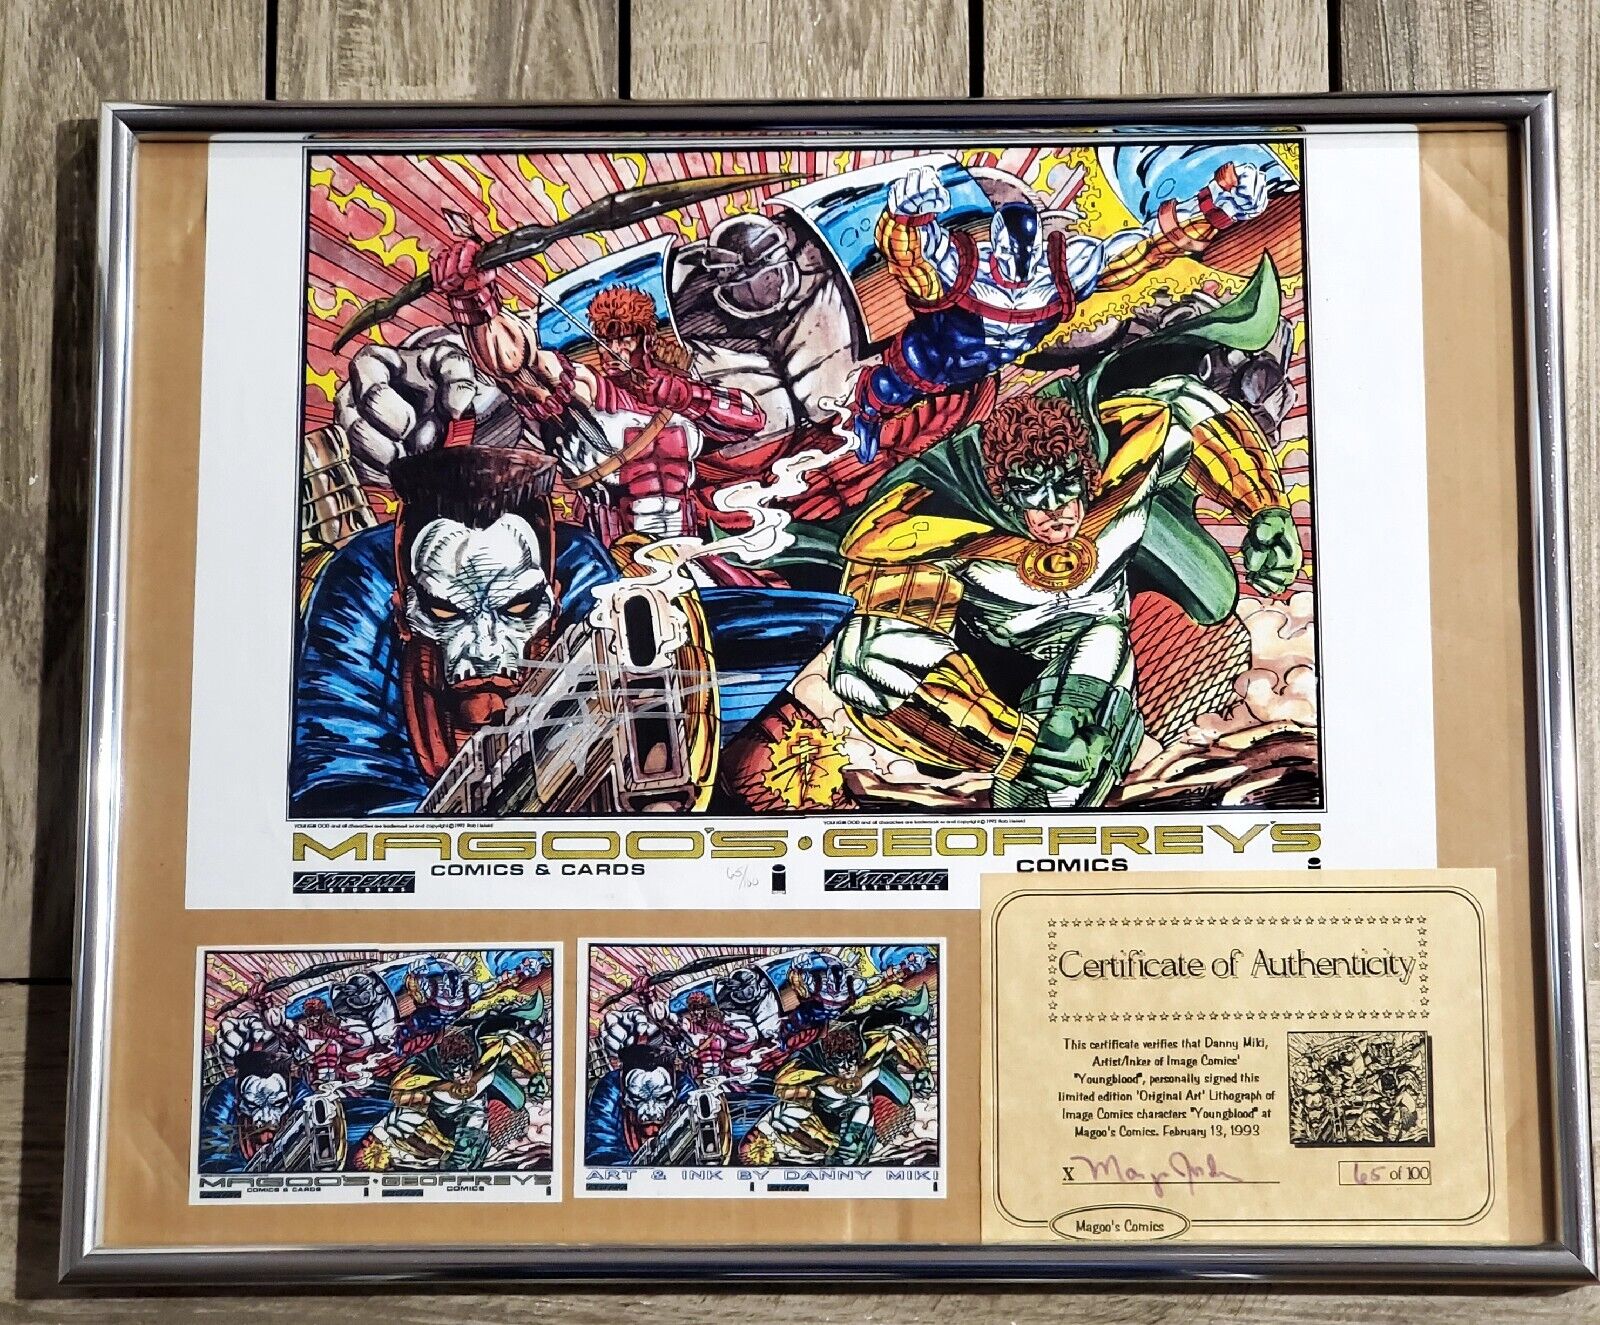 RARE Sigmed Danny Miki Original art Litho of YOUNGBLOOD characters 65/100 COA